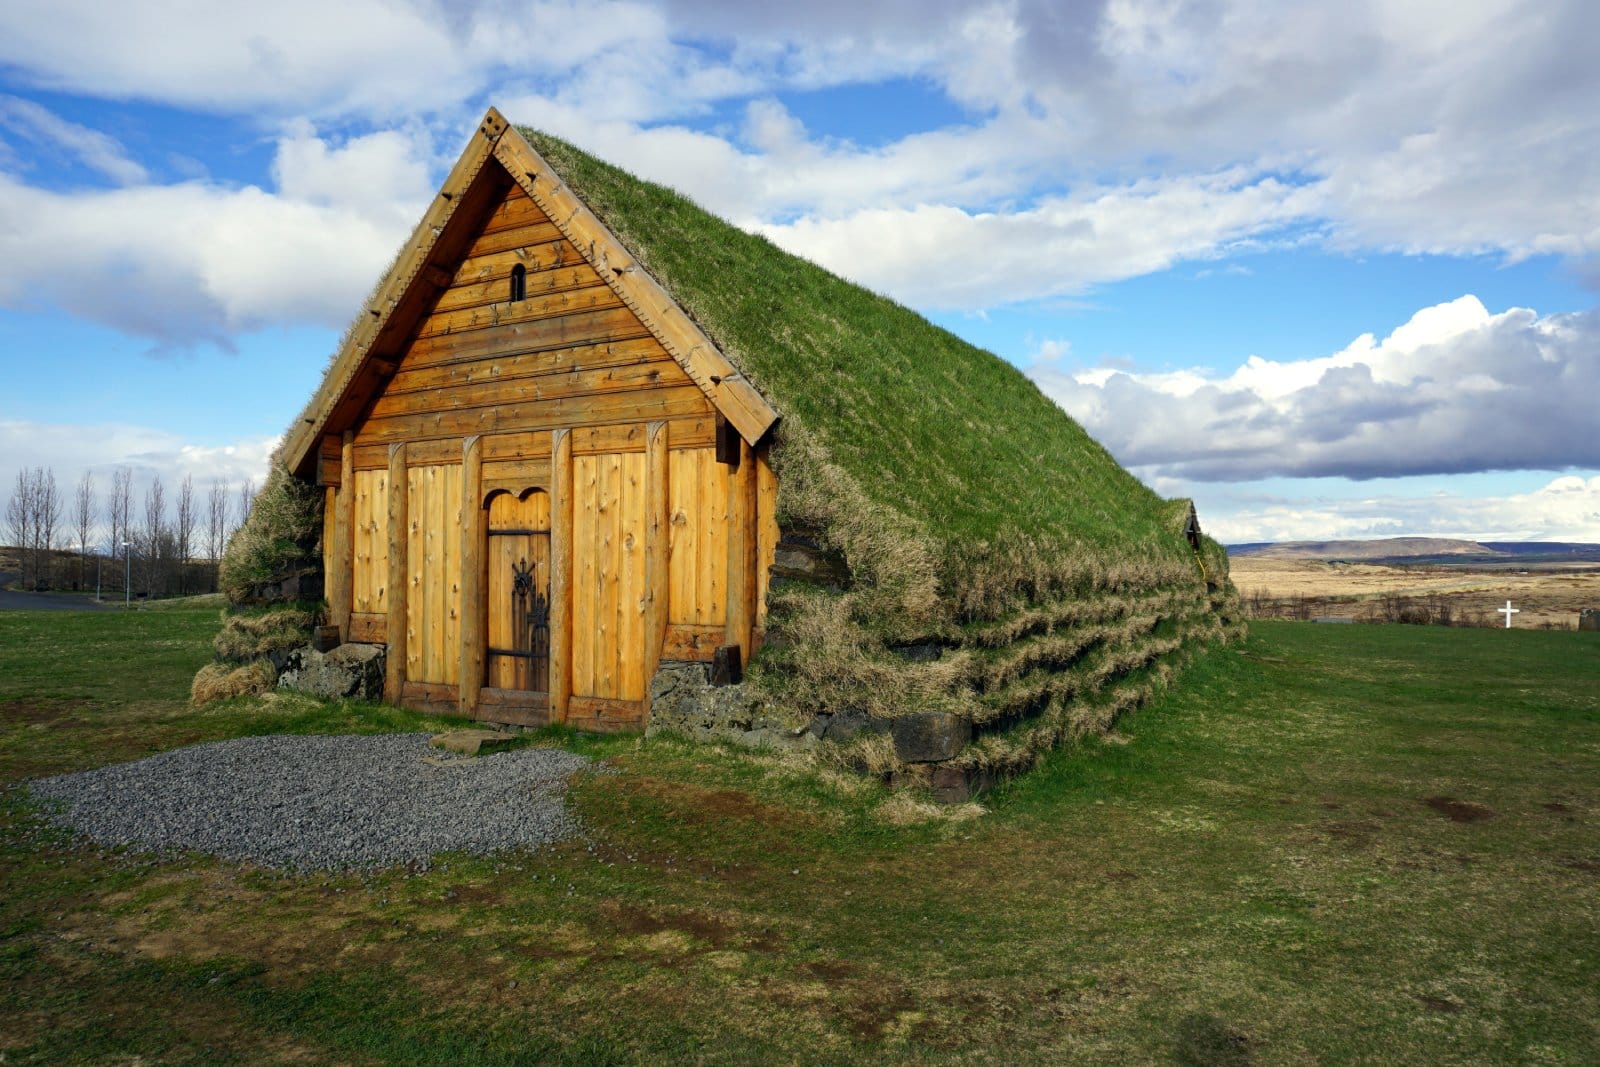 Image Credit: Shutterstock / Ludovic Farine <p>Traditional housing in many indigenous cultures utilizes sustainable materials and methods that minimize environmental impact. We can draw on this knowledge to influence modern green building practices.</p>